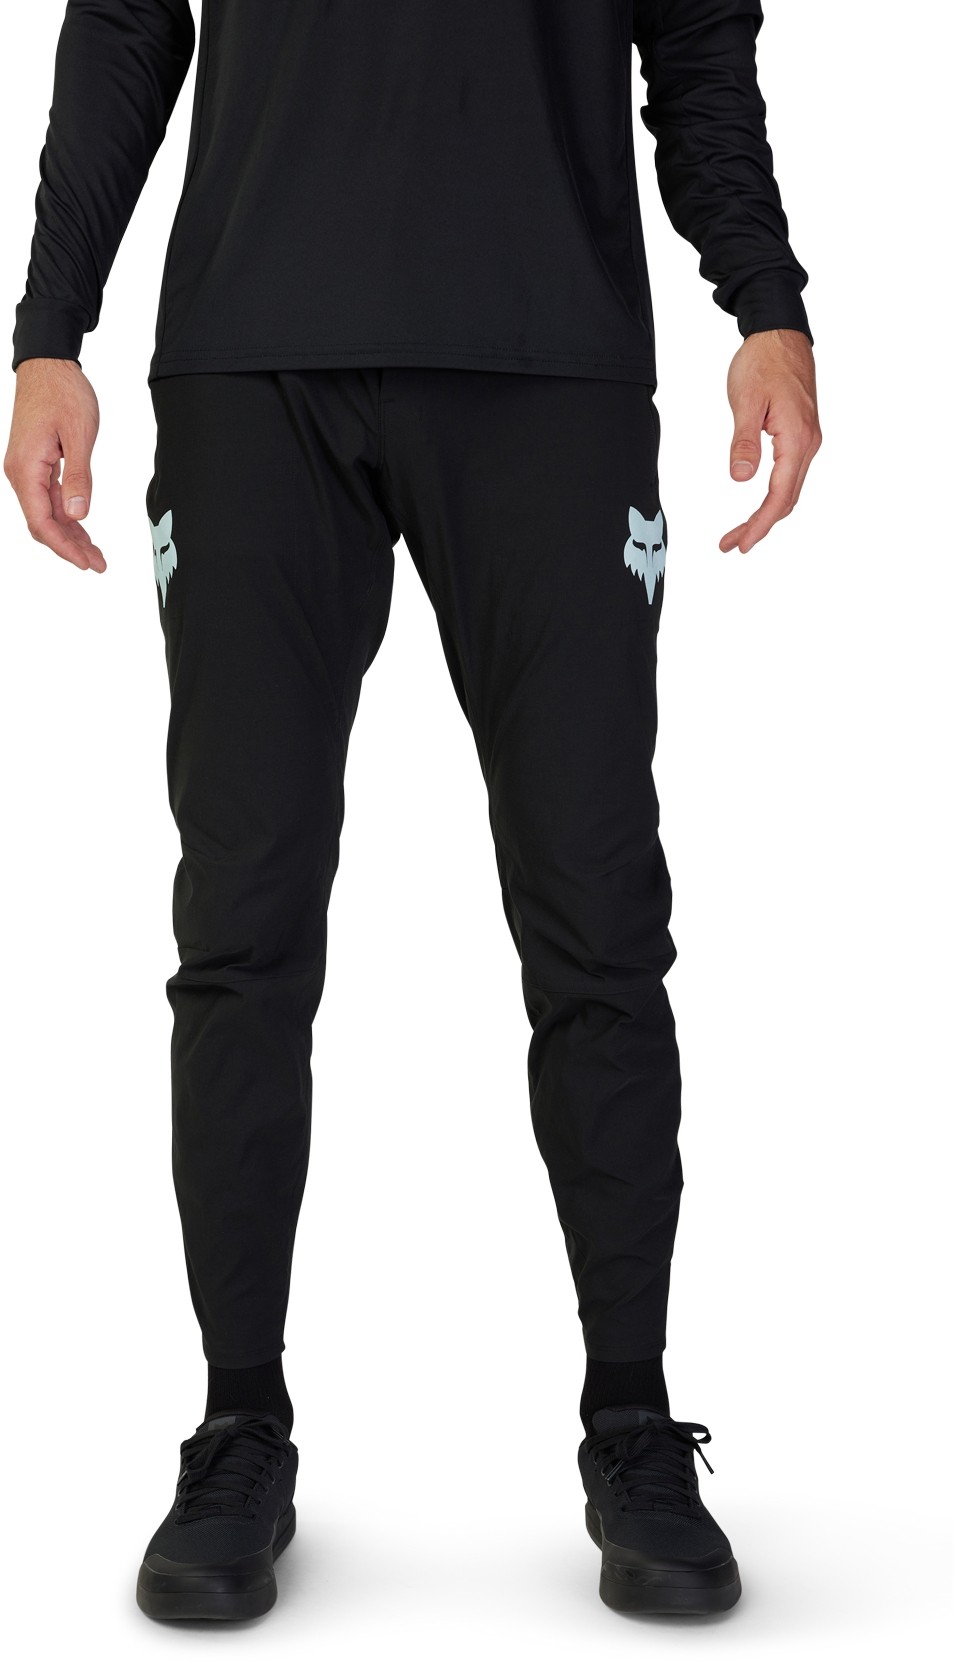 Ranger Race MTB Cycling Trousers image 2